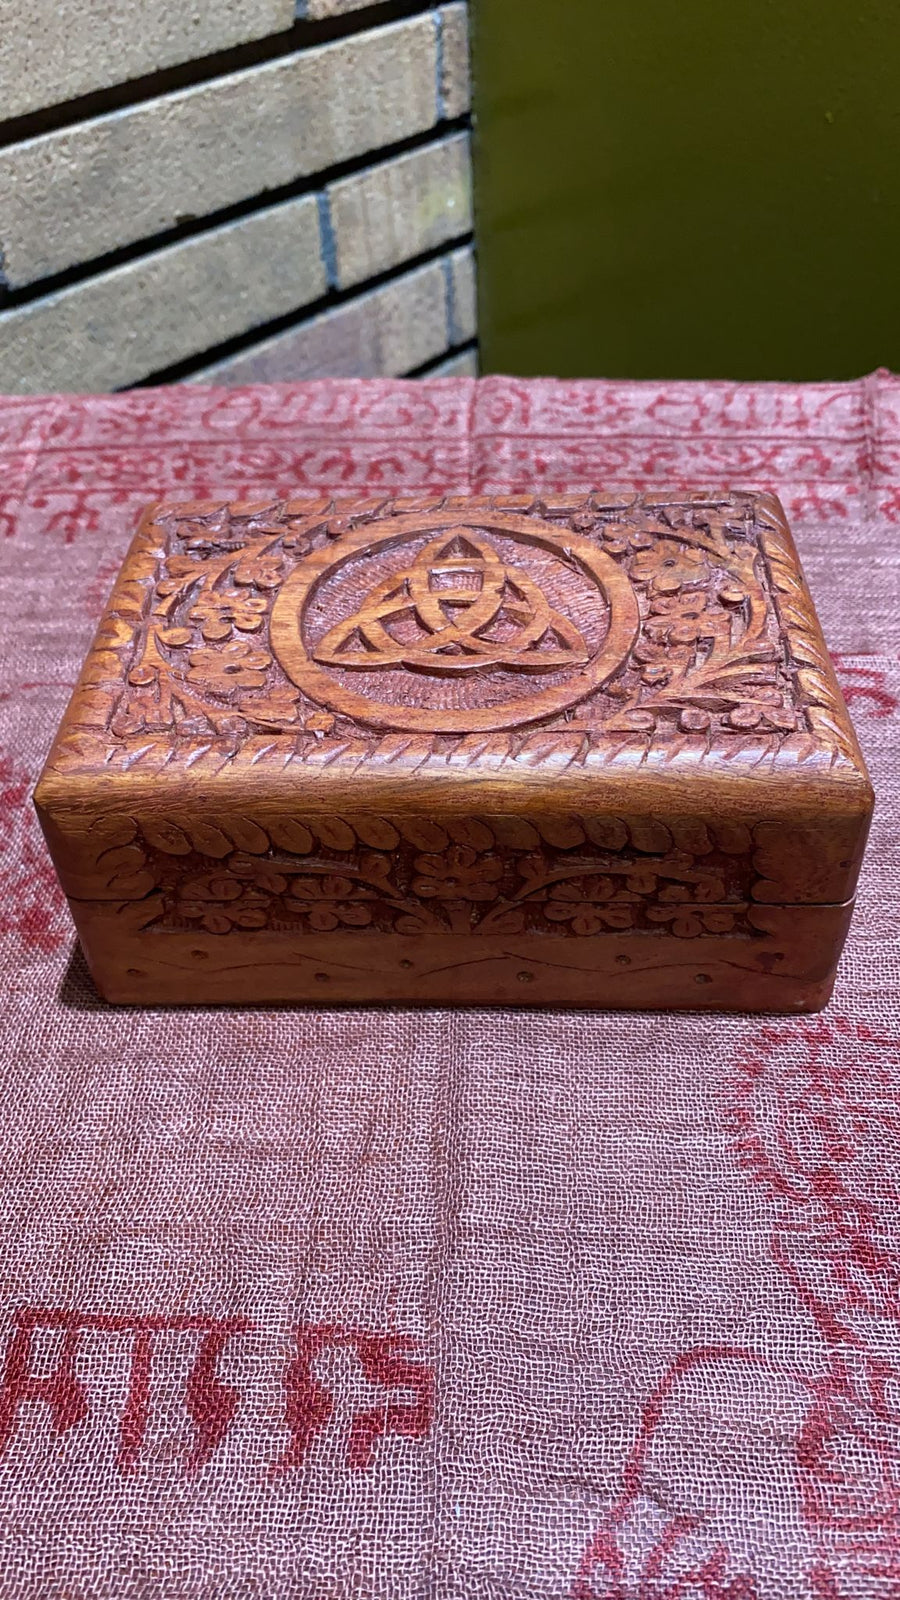 small wooden chest